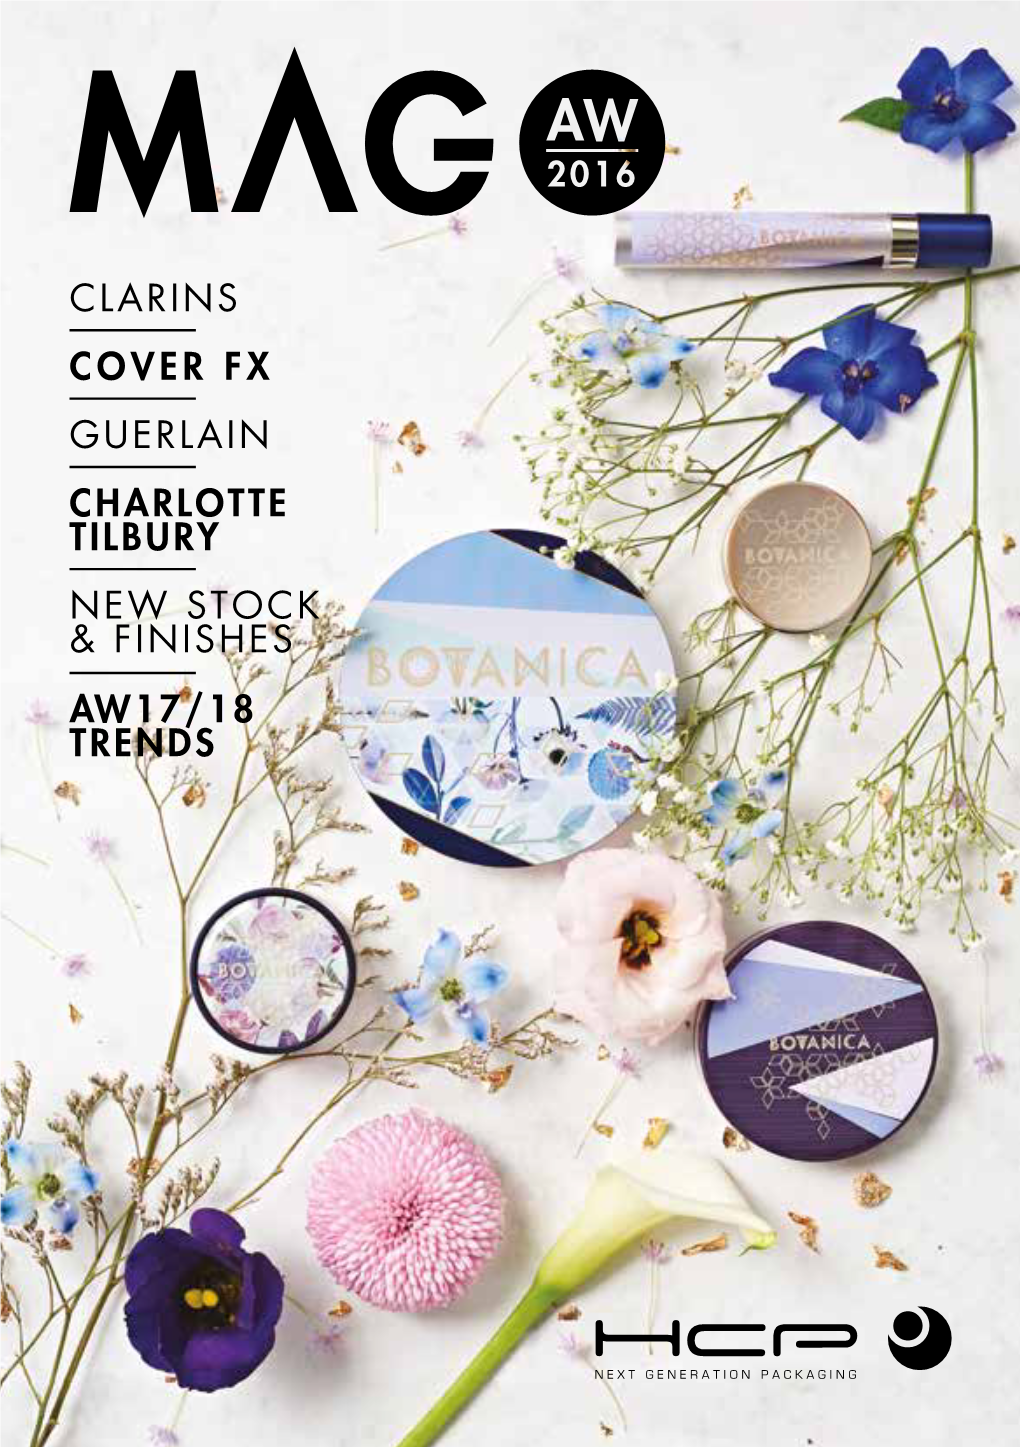 Aw17/18 Trends Charlotte Tilbury Cover Fx Guerlain Clarins New Stock & Finishes